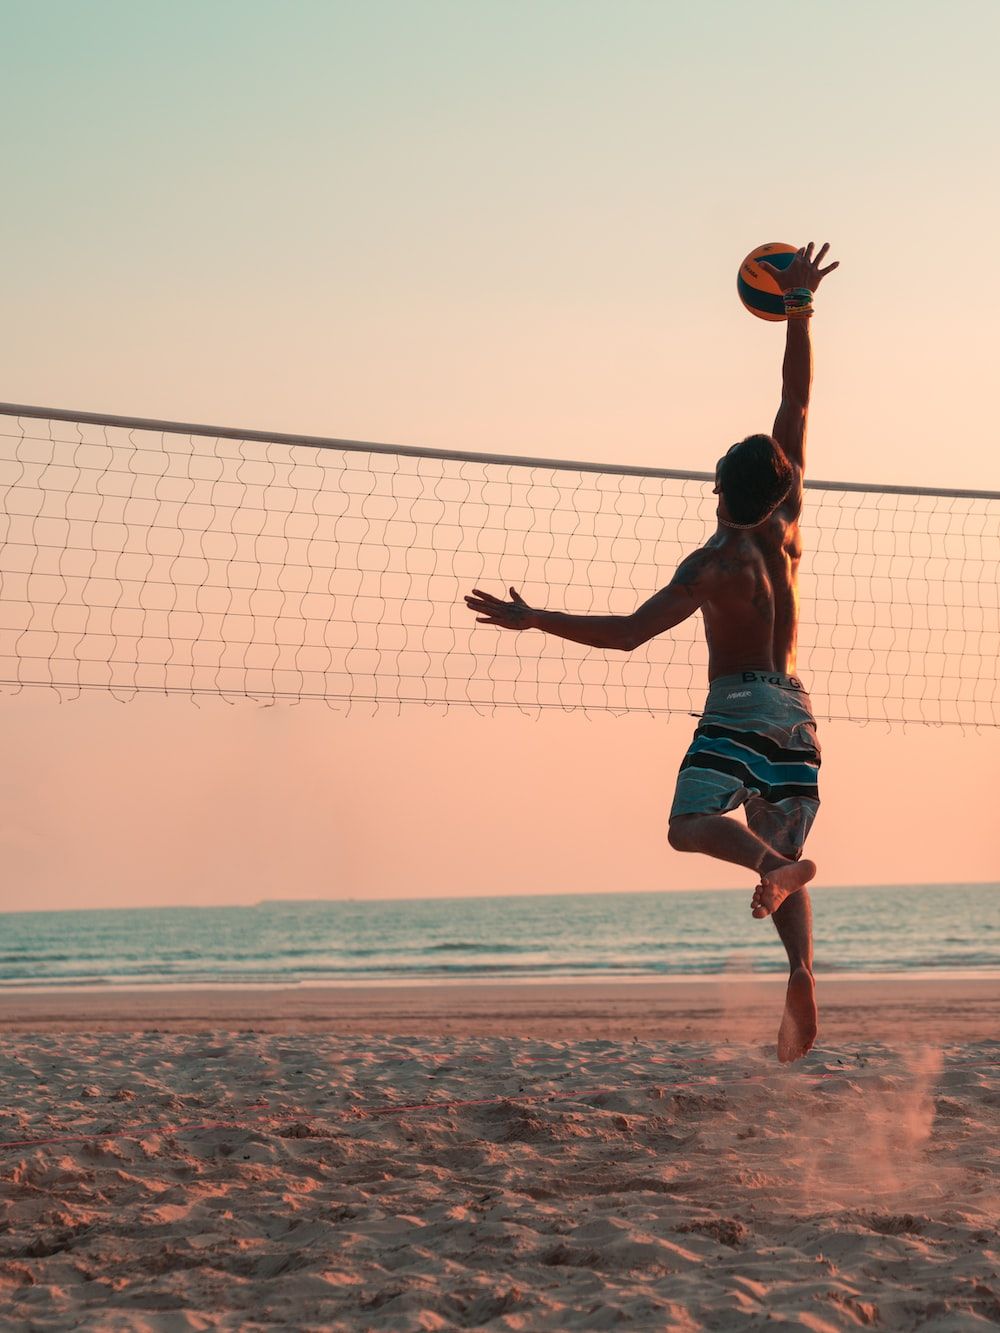 A man jumping to hit the volley ball - Volleyball